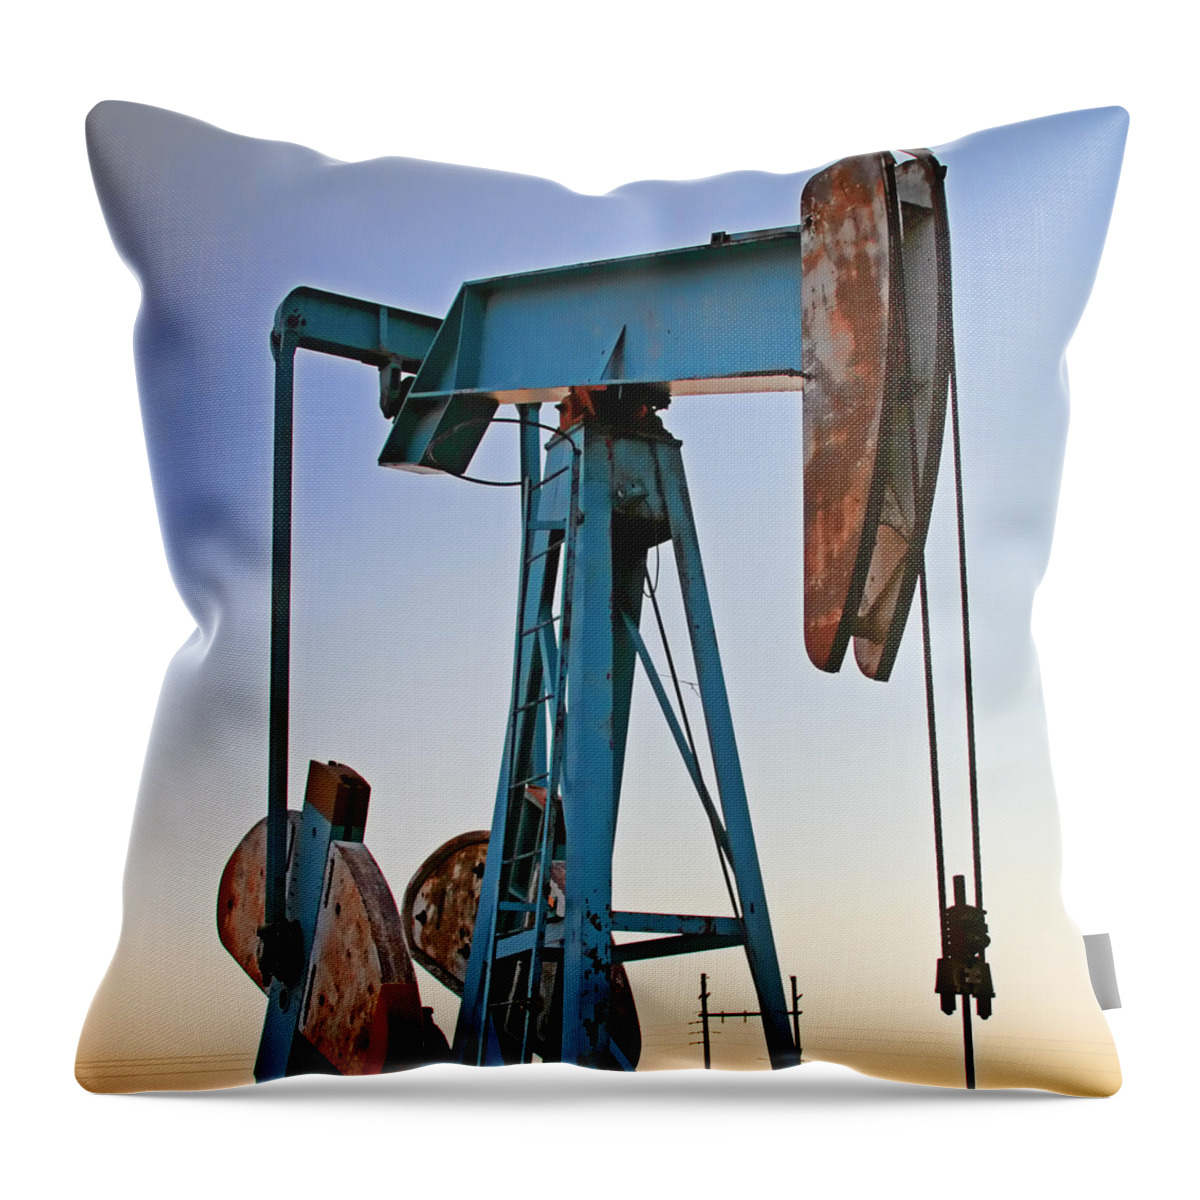 Oil Throw Pillow featuring the digital art Rusty Blue Sunset by Tony Grider